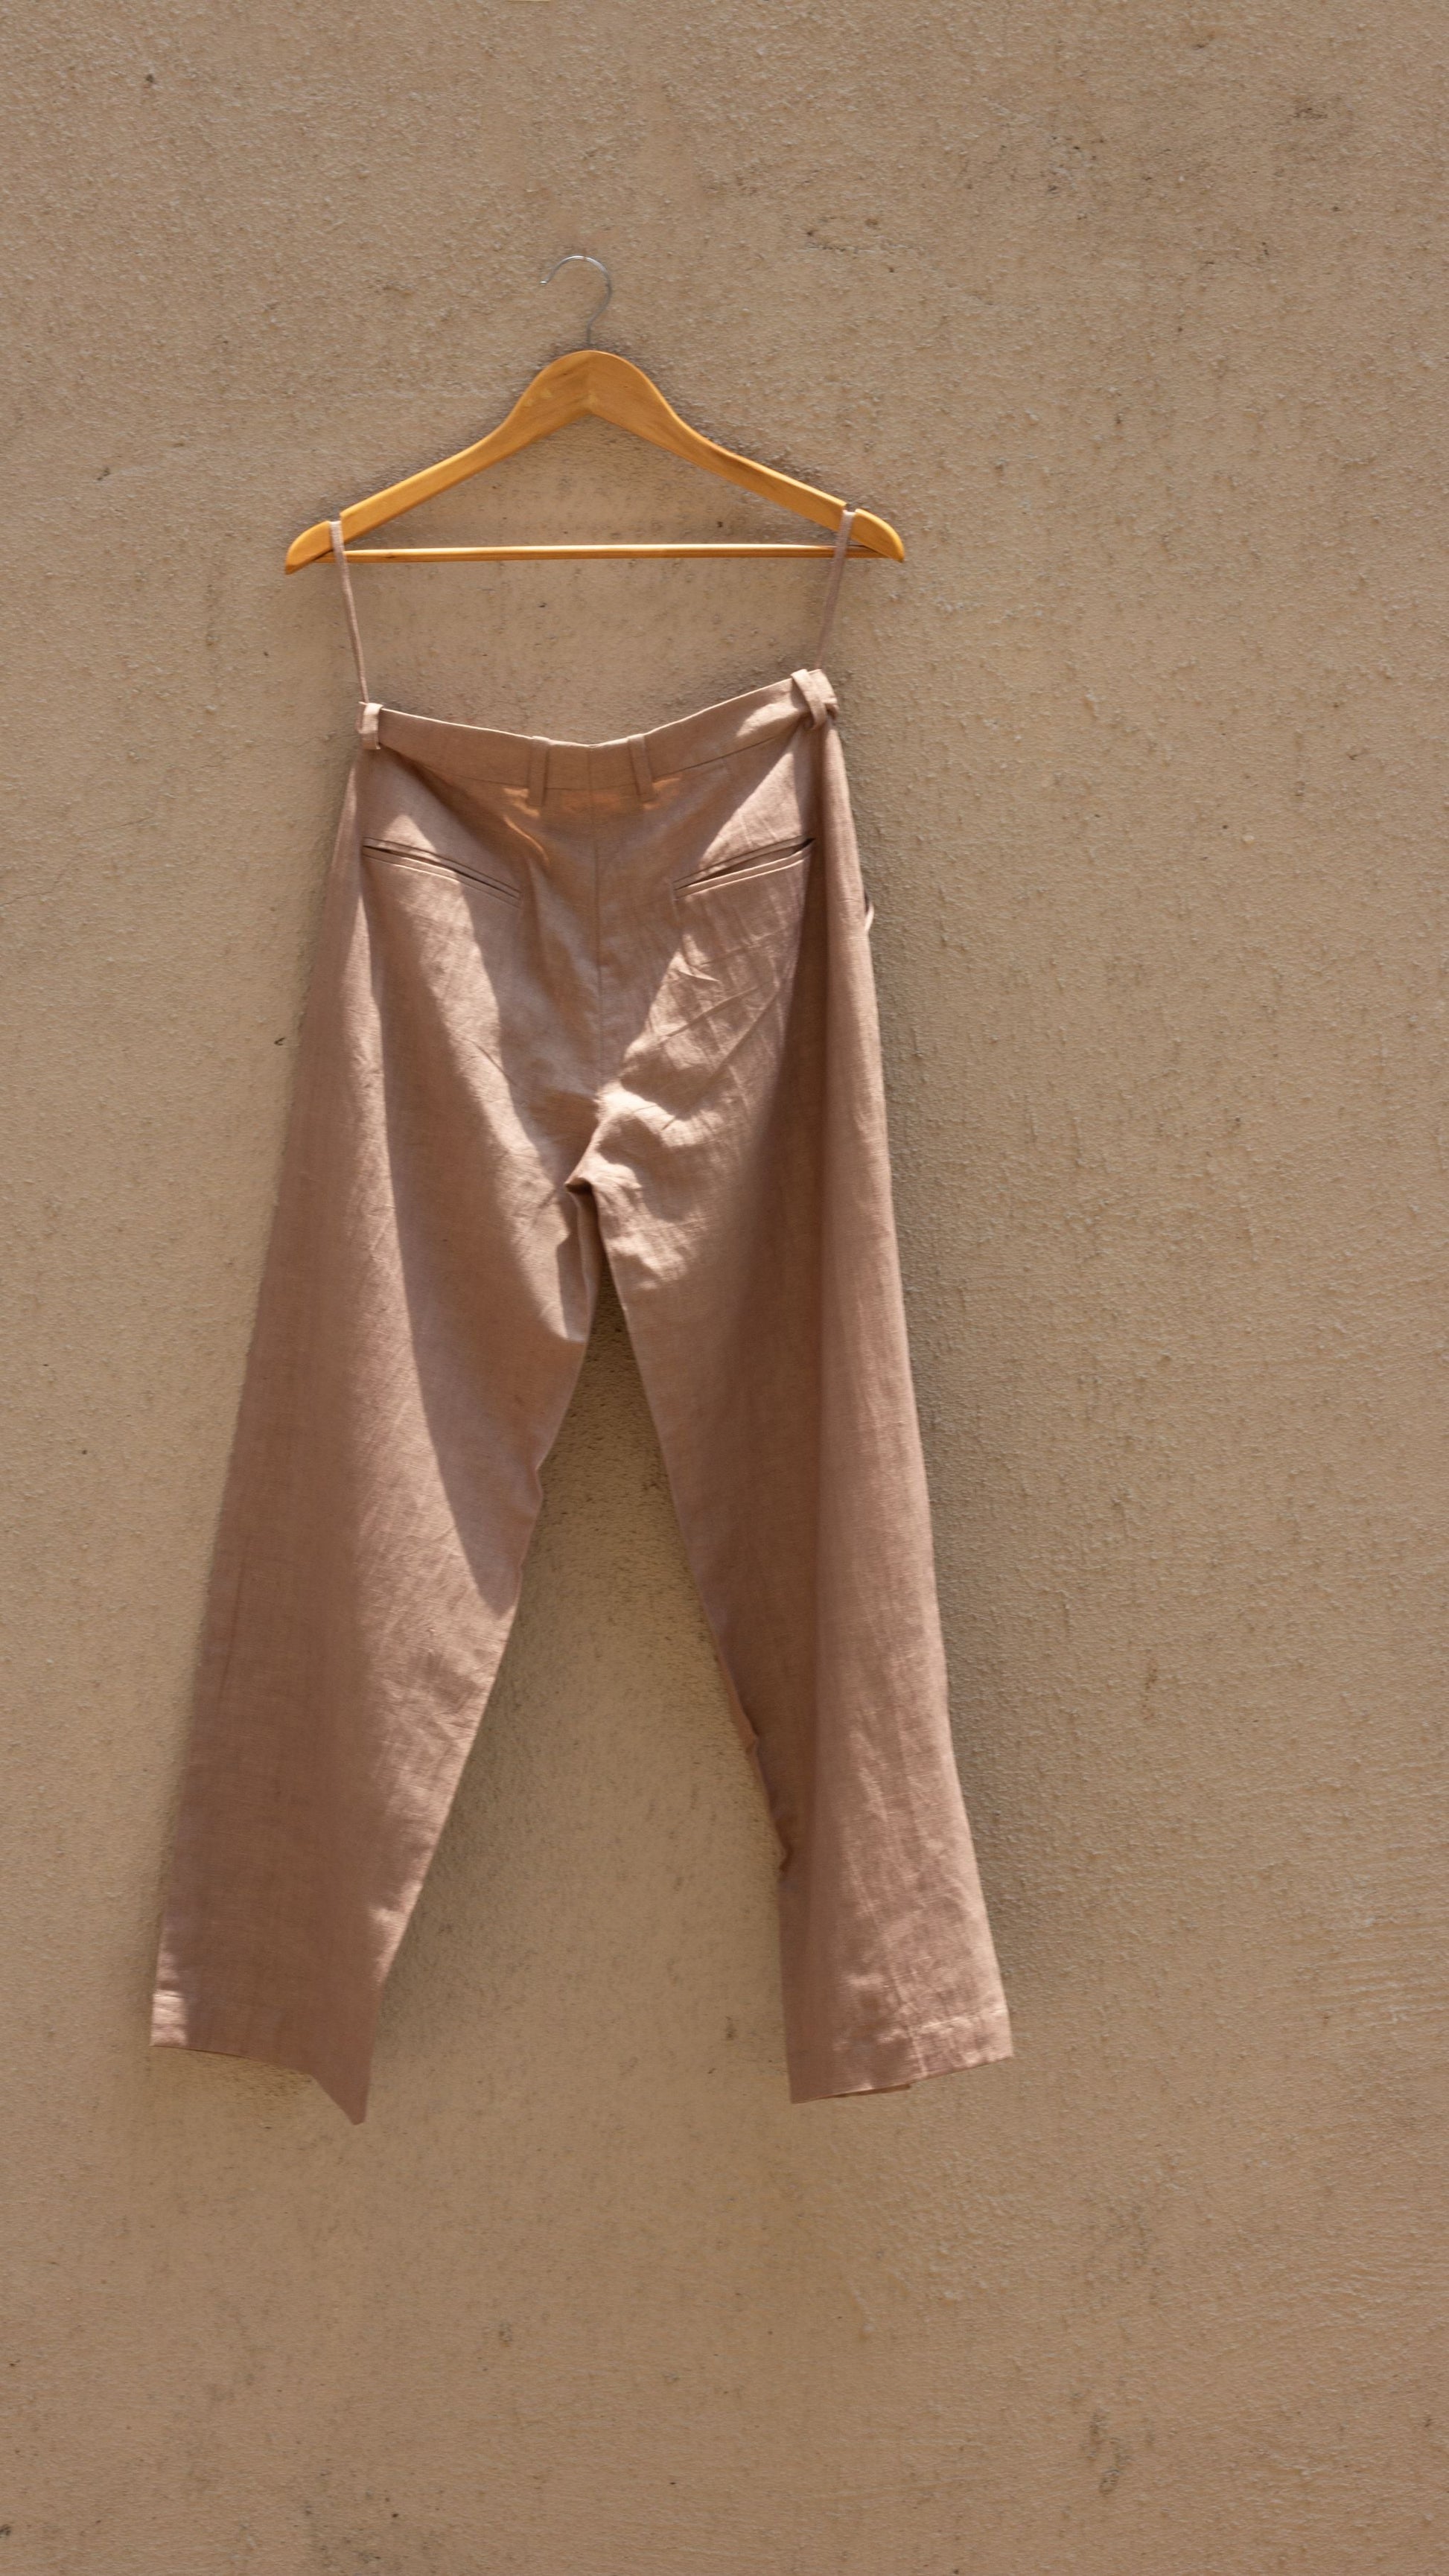 Sunset Rose Casual Trousers at Kamakhyaa by Anushé Pirani. This item is Beige, Casual Wear, Cotton, Cotton Hemp, For Him, Handwoven, Hemp, Mens Bottom, Menswear, Regular Fit, Shibumi Collection, Solids, Trousers